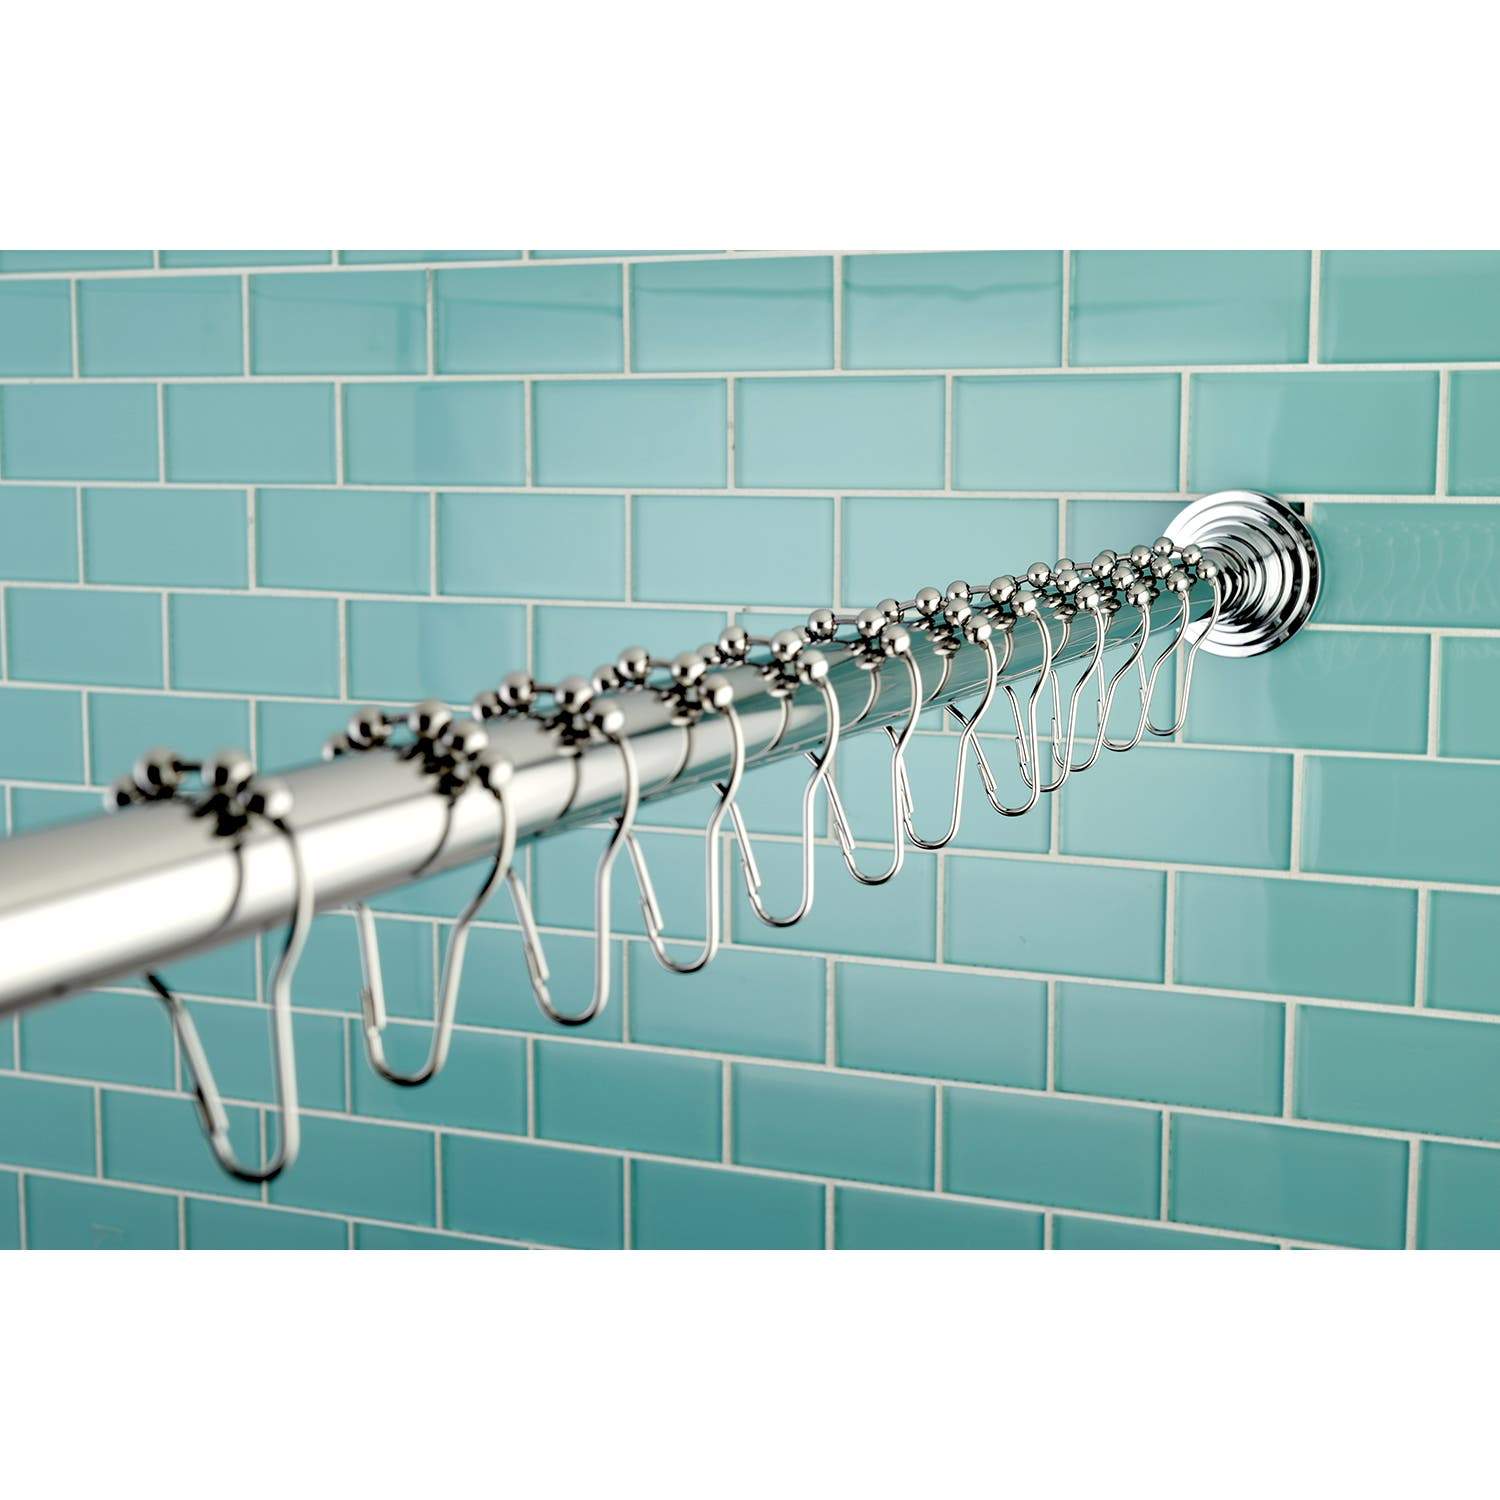 Kingston Brass Edenscape 72-Inch Adjustable Shower Curtain Rod with Ring